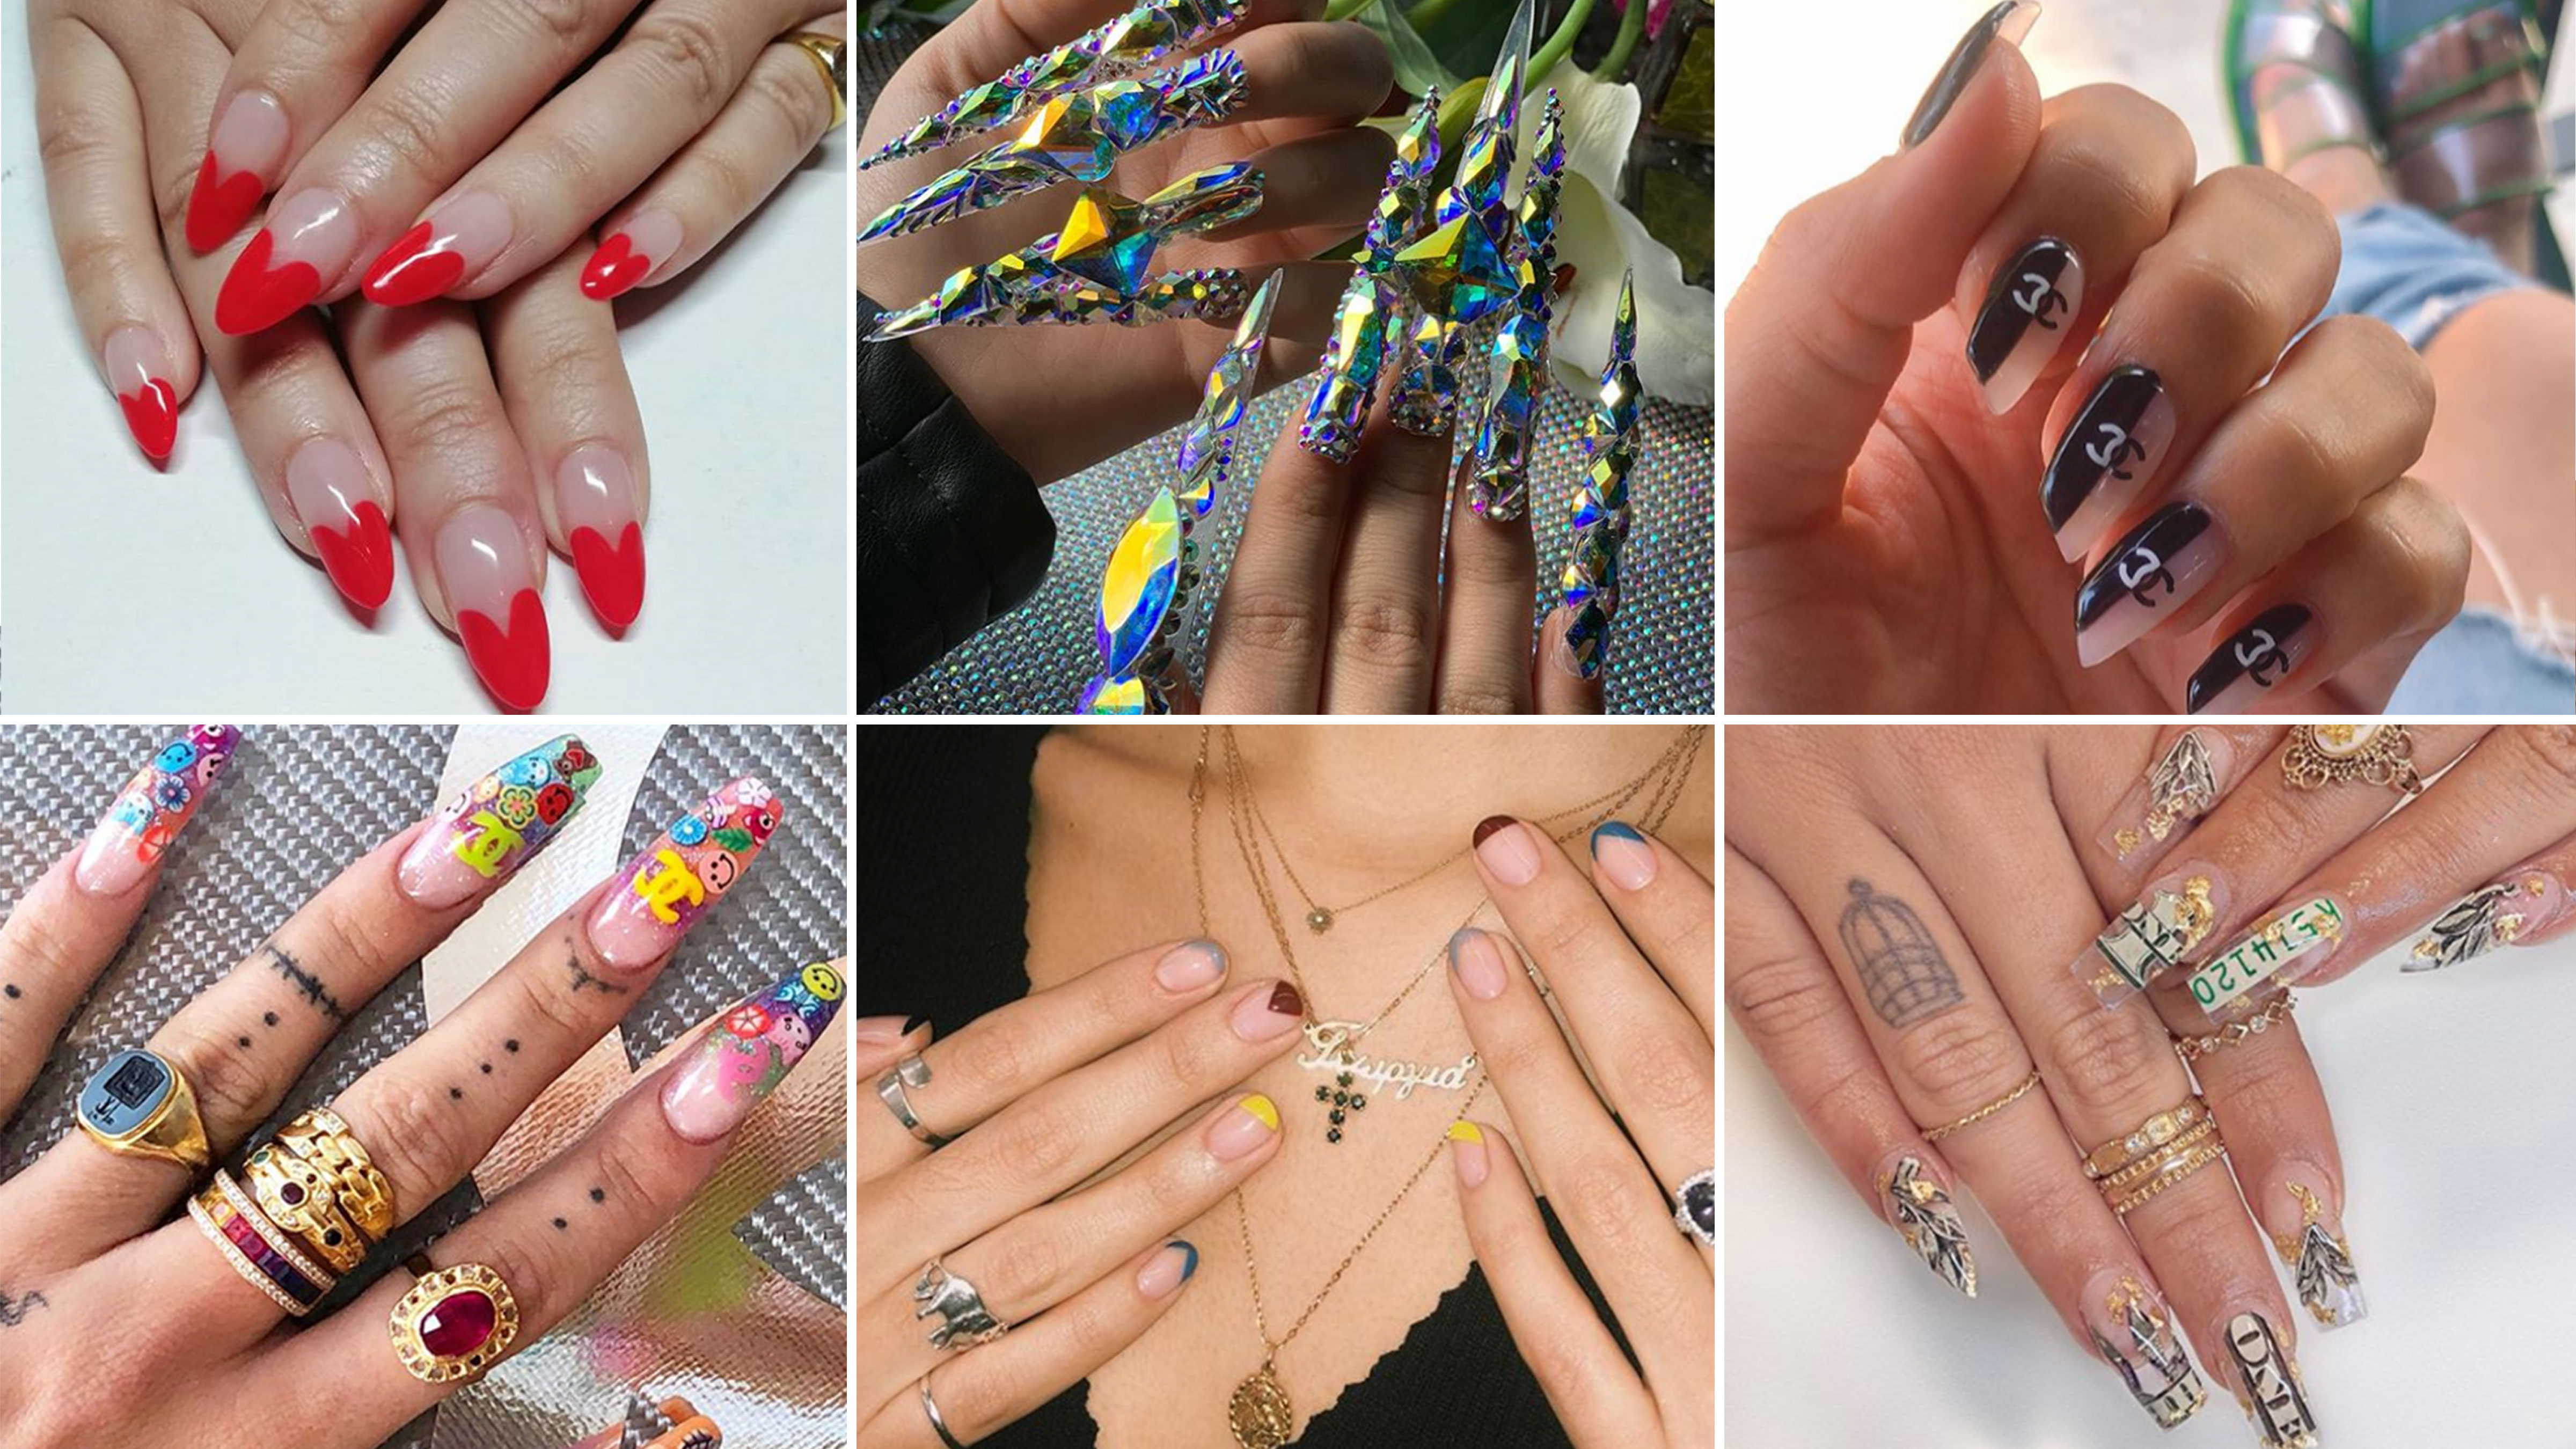 6. Indian Nail Art Influencers and Artists - wide 7